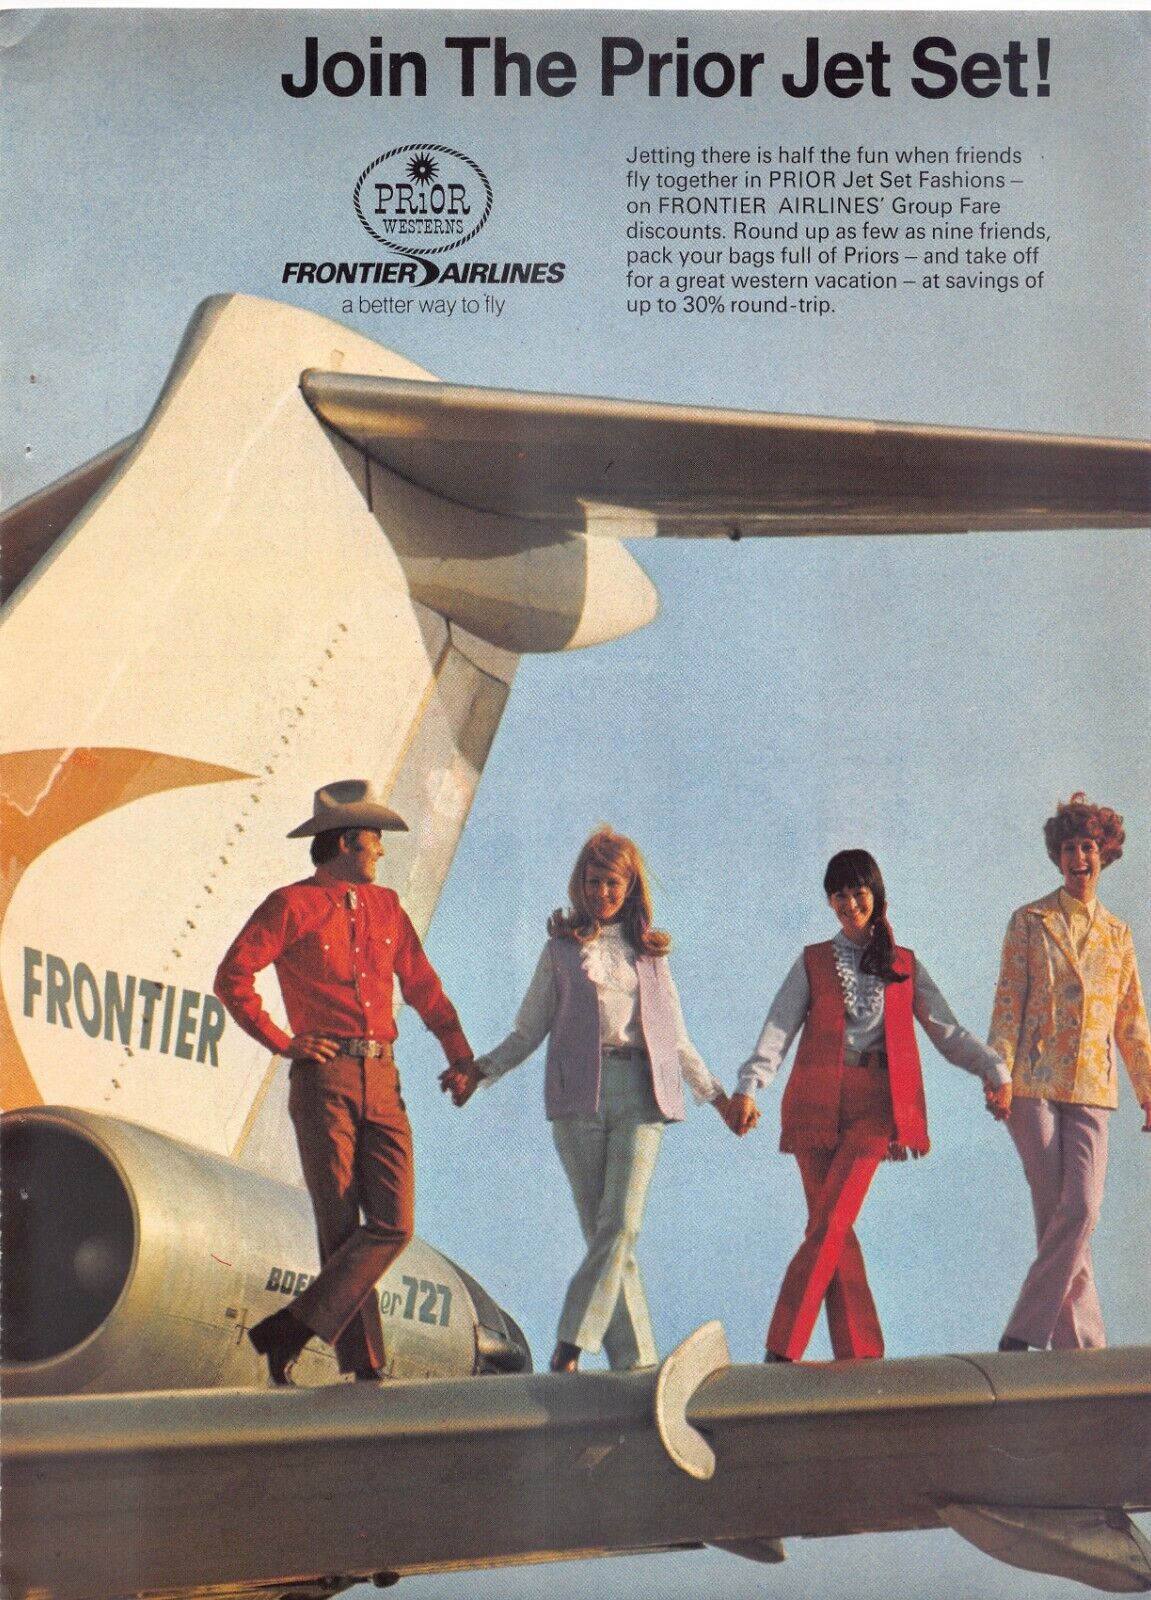 Frontier Airlines Prior Jet Set Fashions Group Fare Vintage Magazine Print Ad